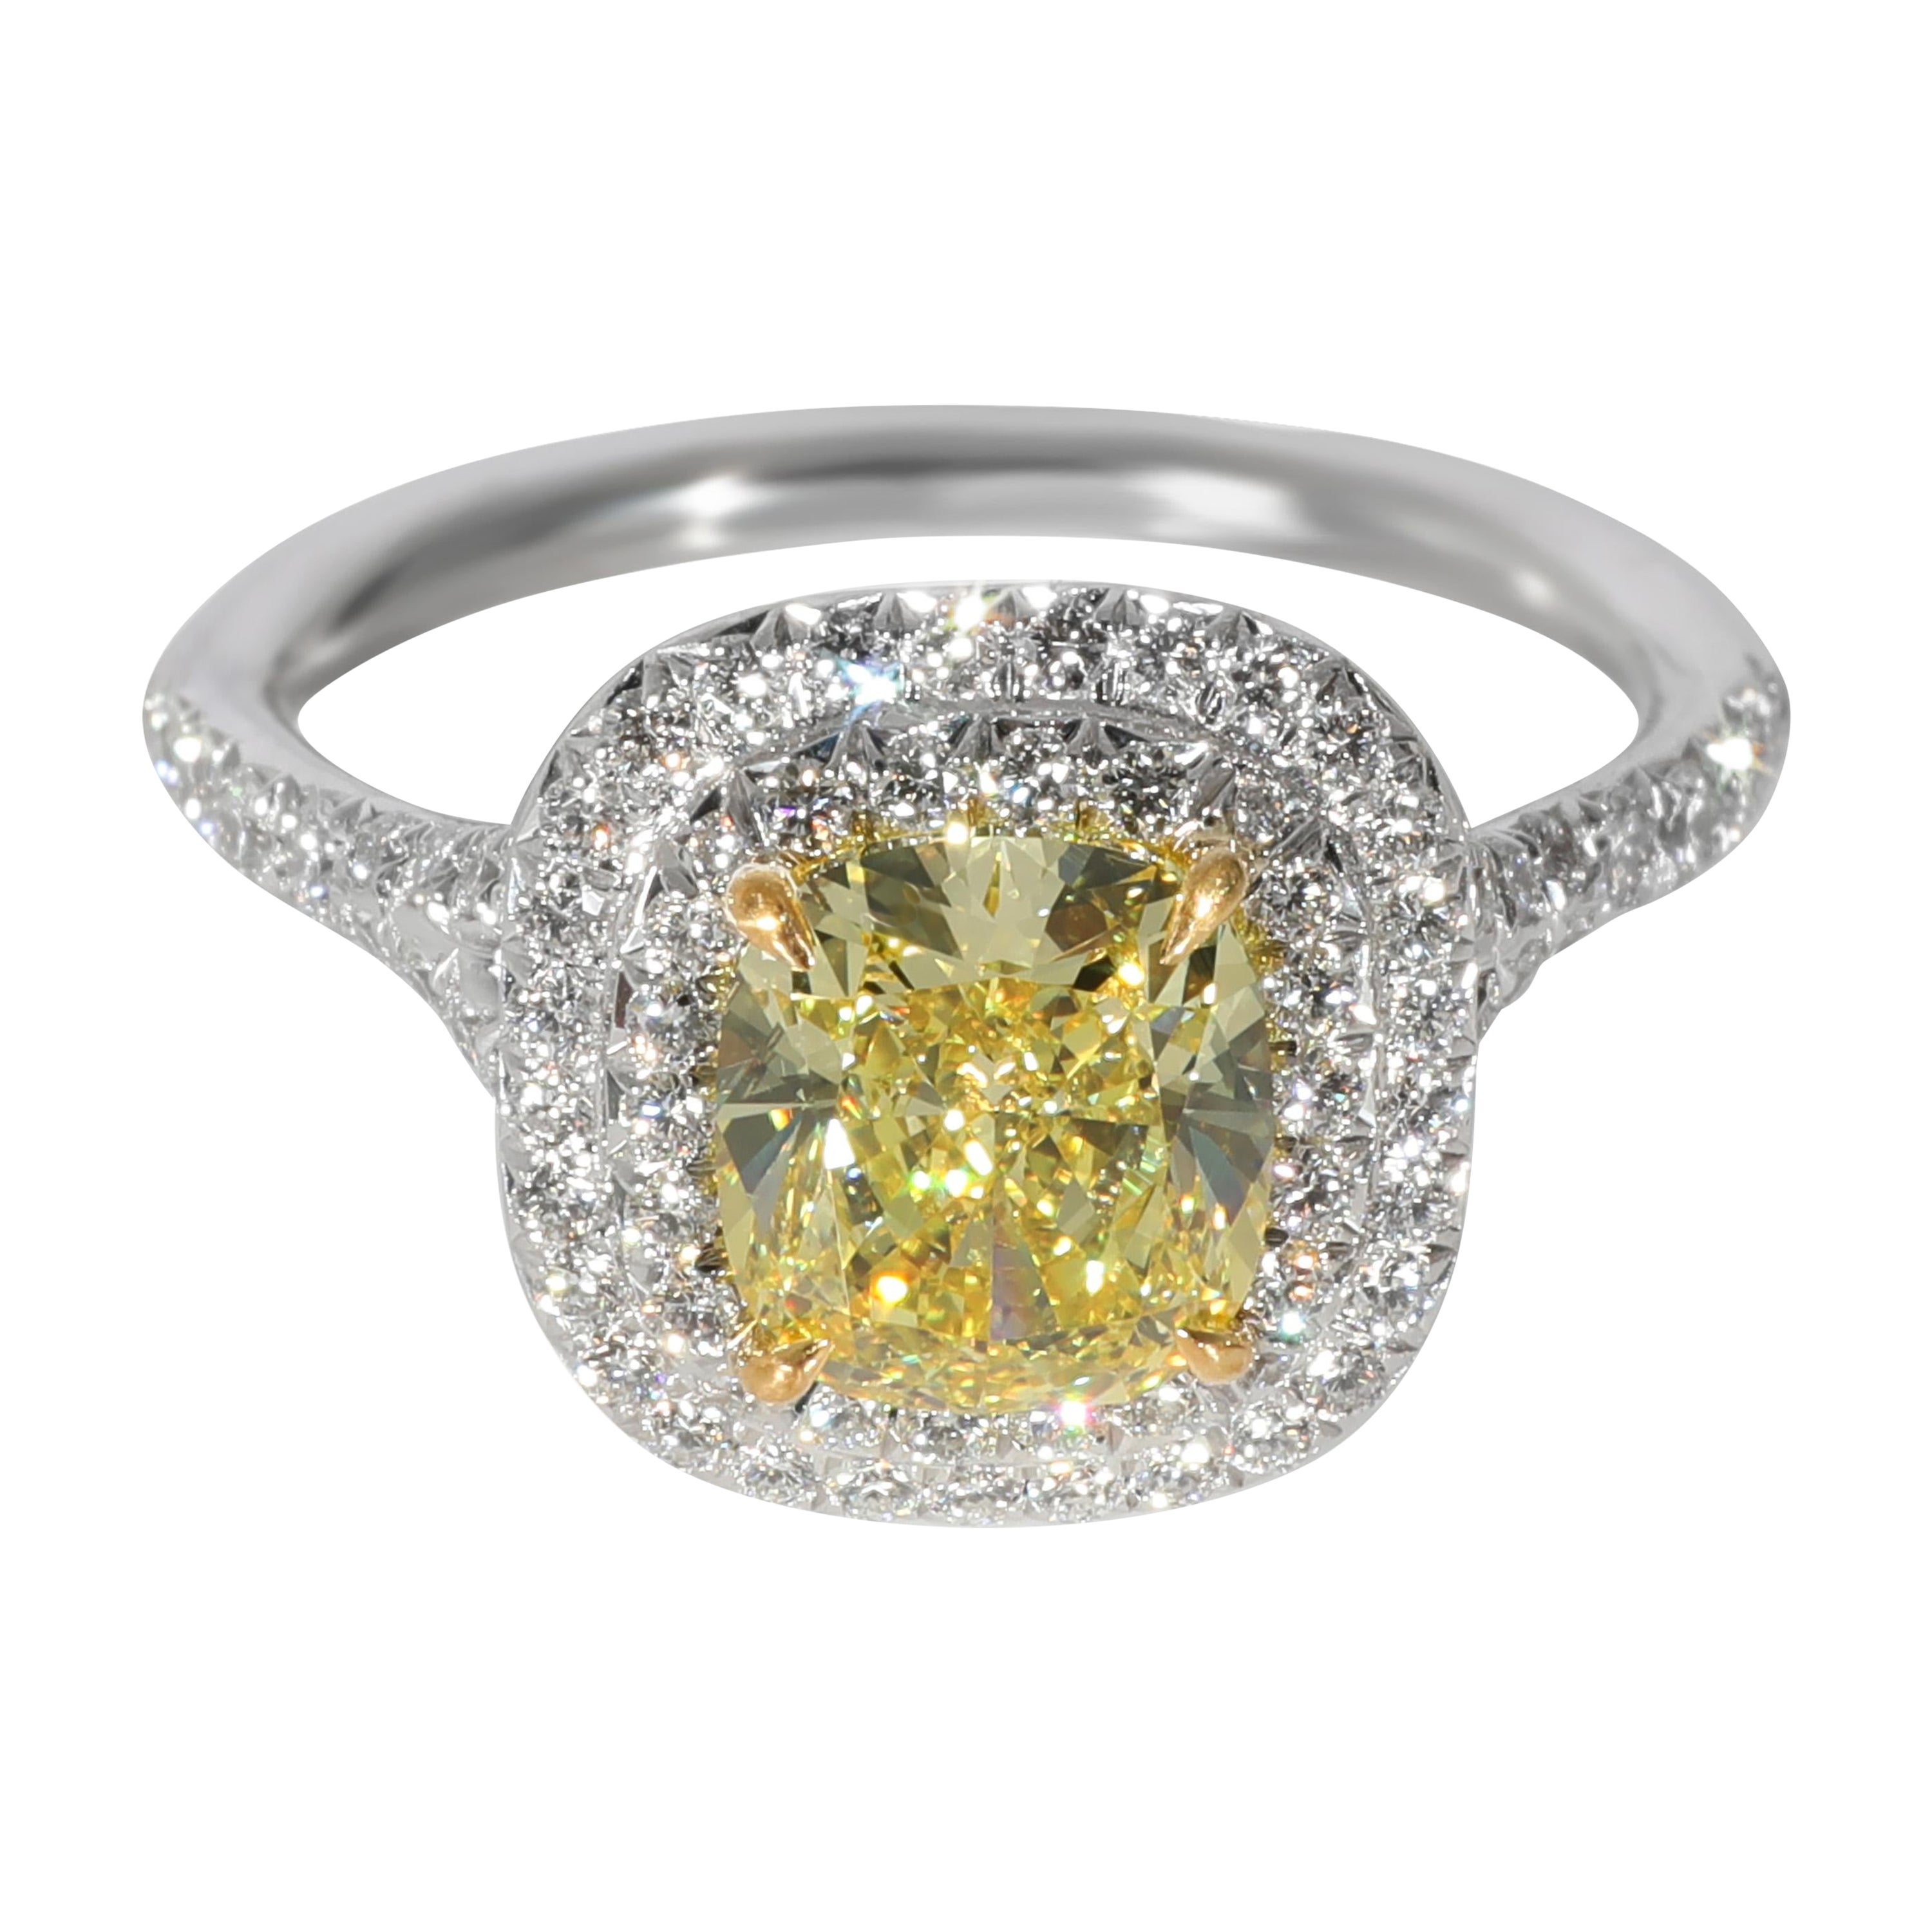 Tiffany & Co. Soleste Yellow Diamond Engagement Ring in 18k Gold & Platinum 1.98 For Sale